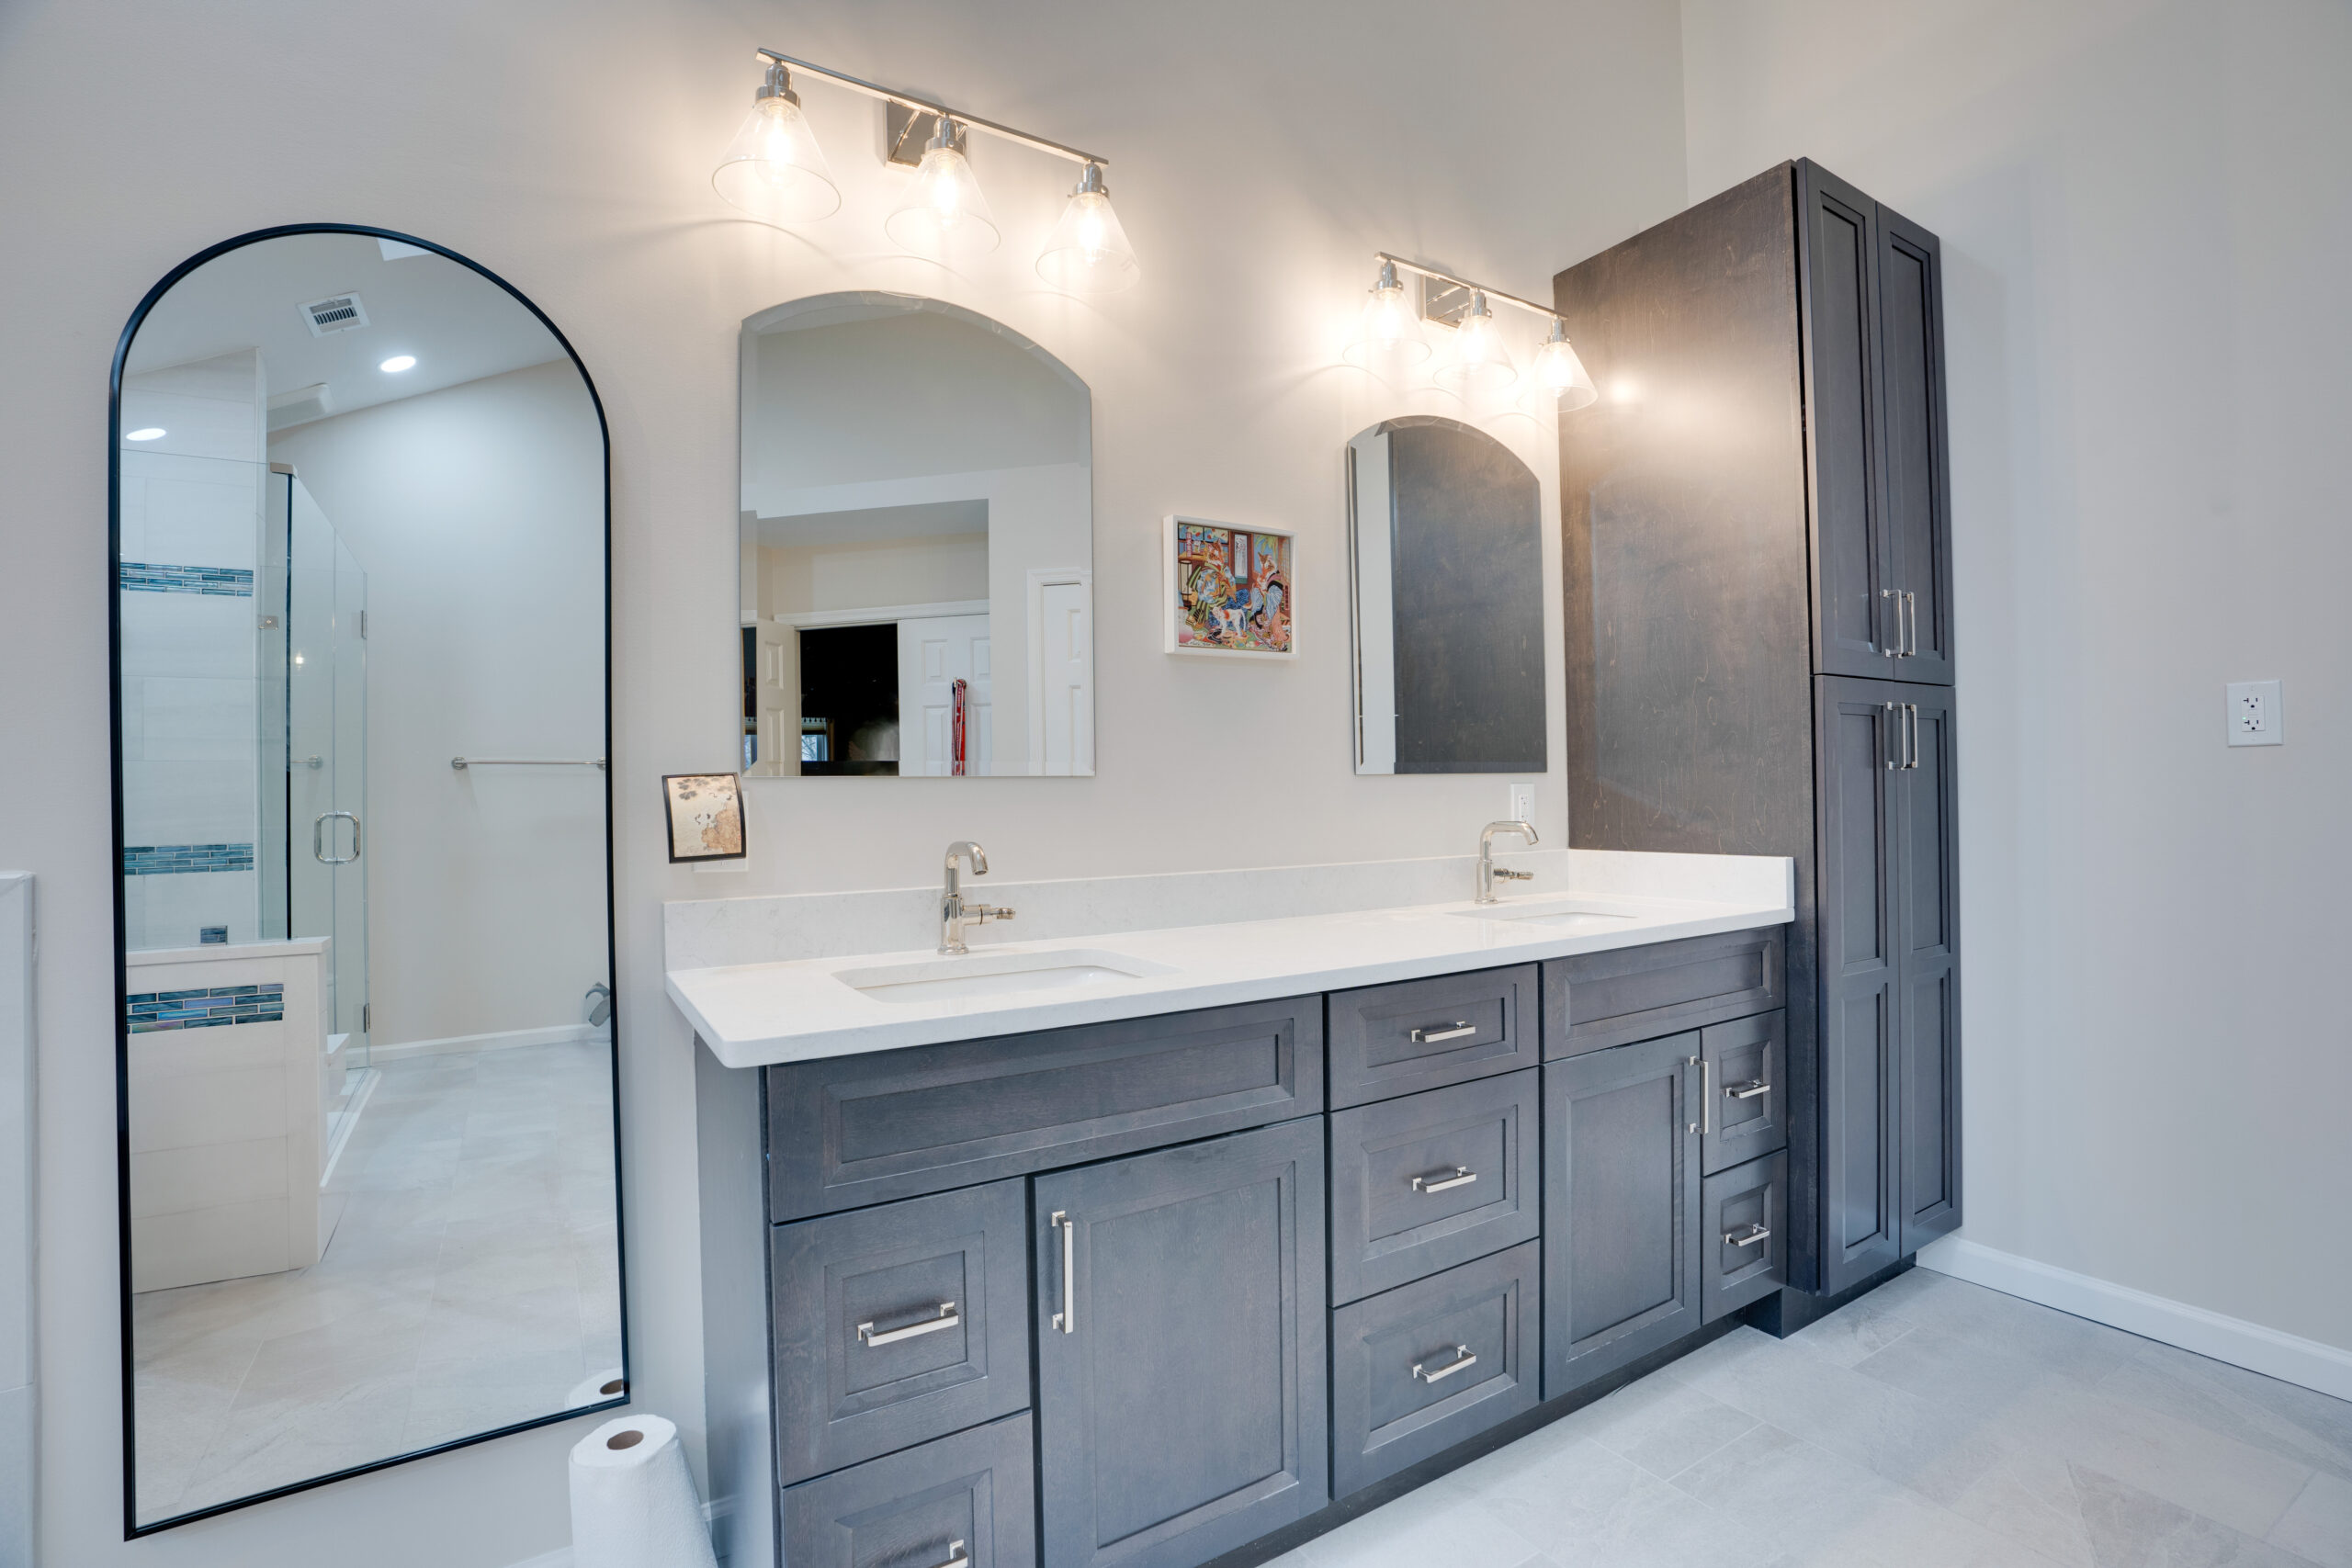 Bathroom in Bowie, MD with dark gray cabinets